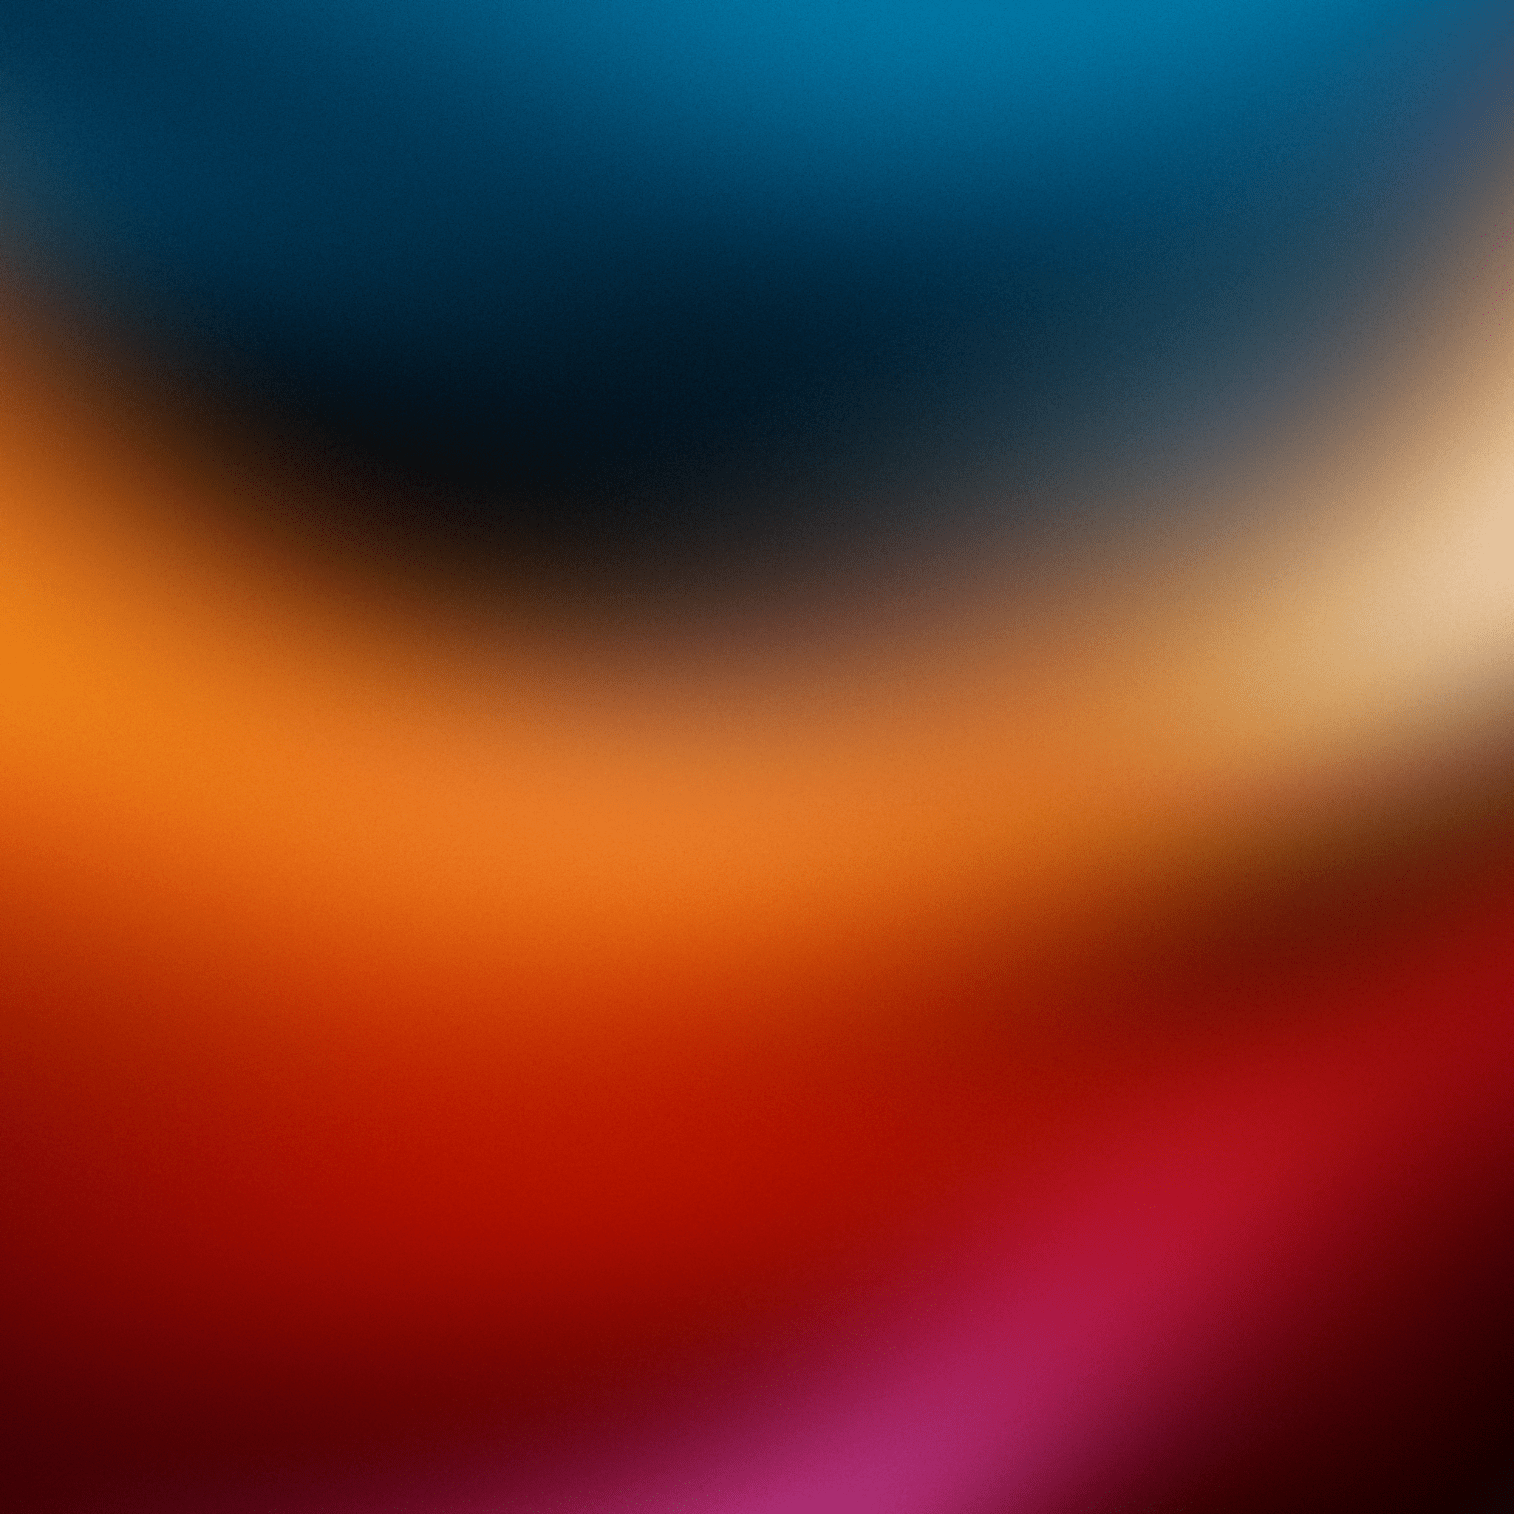 A photograph of a red, orange, and blue abstract painting - Warm, gradient